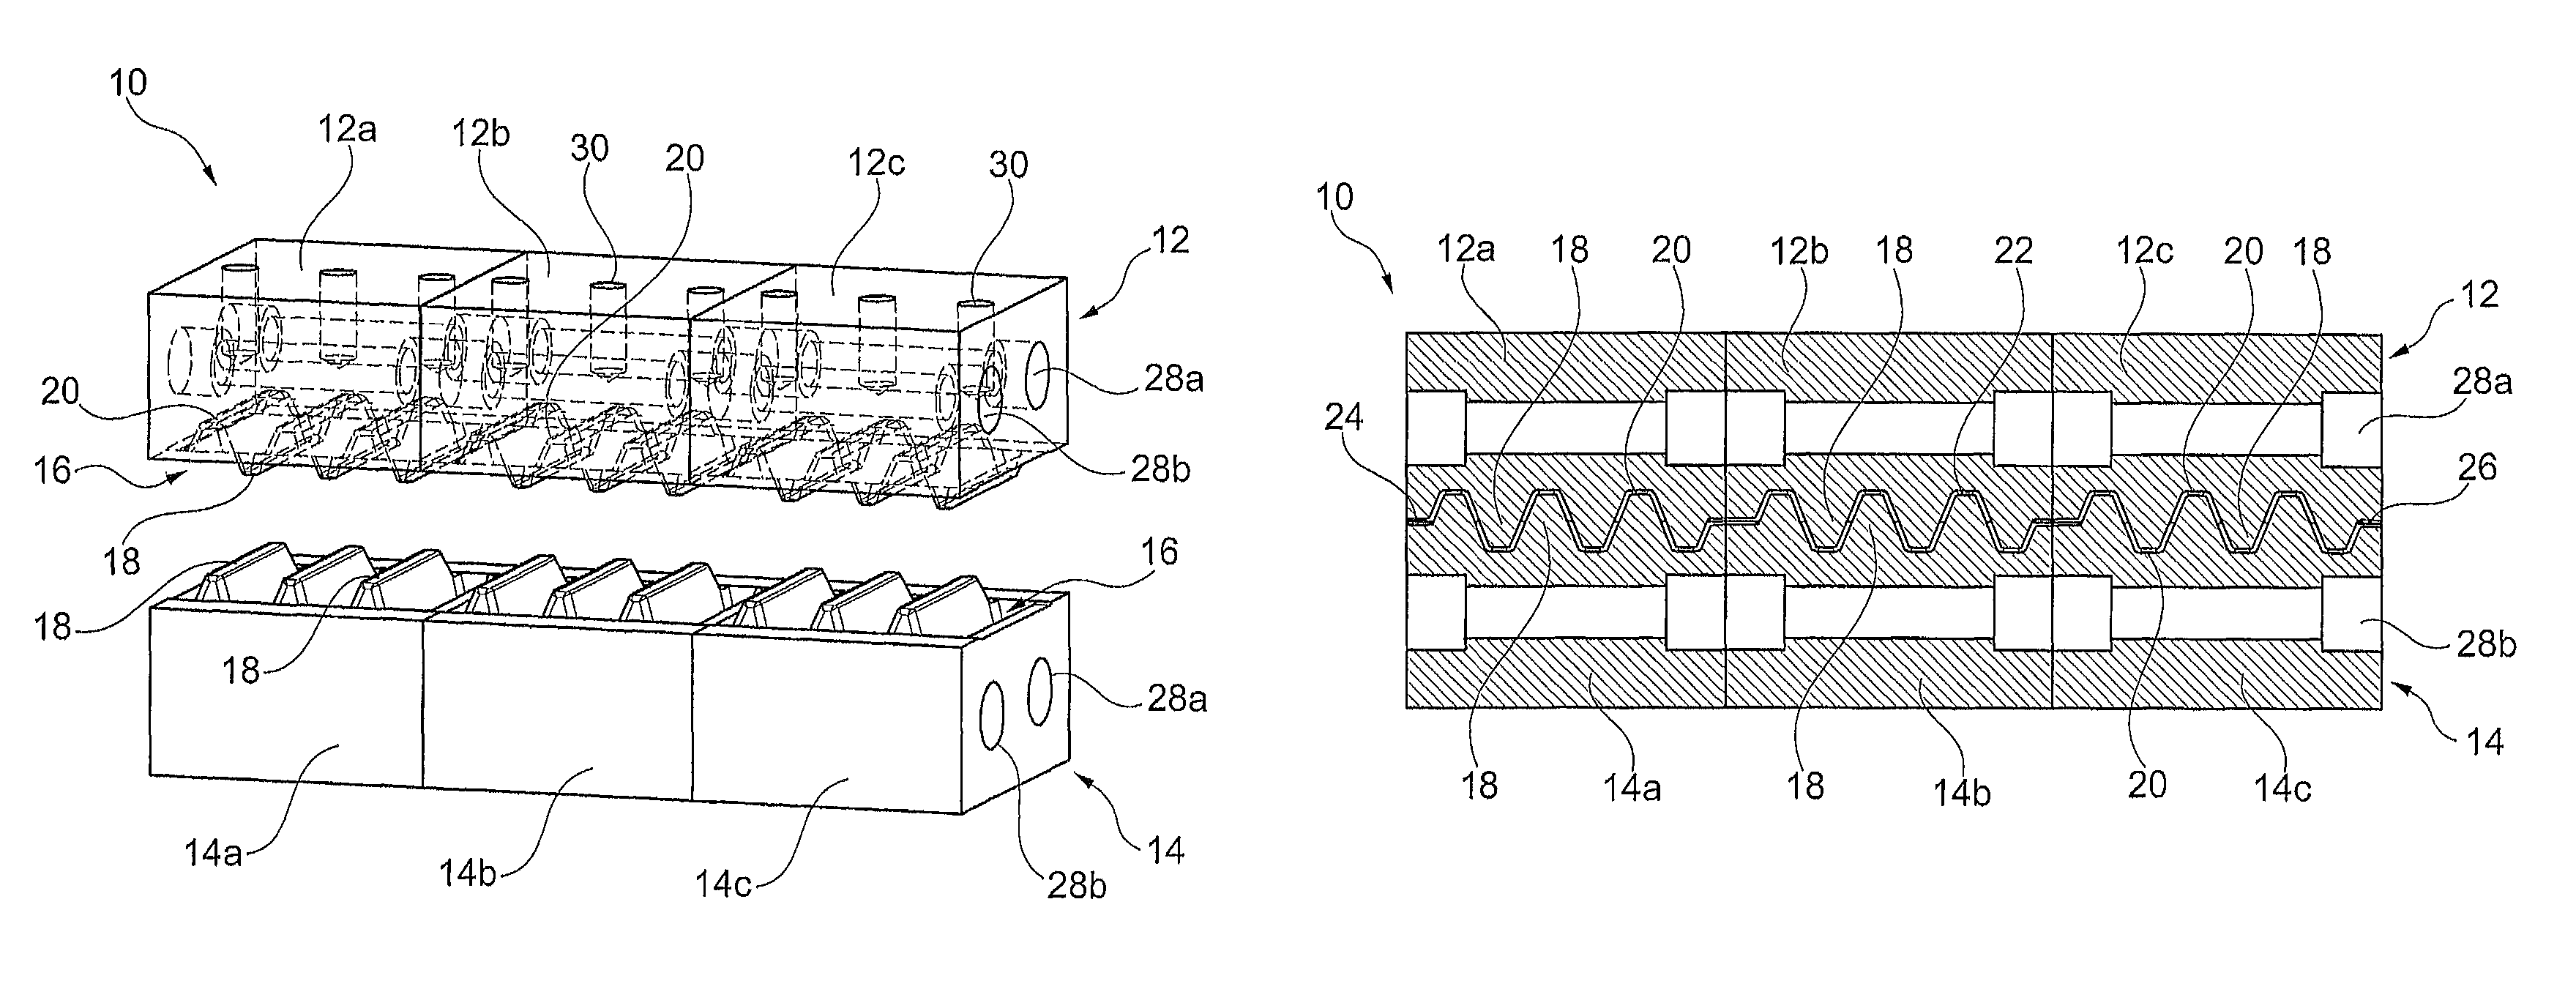 Apparatus for ventilation of a casting mold